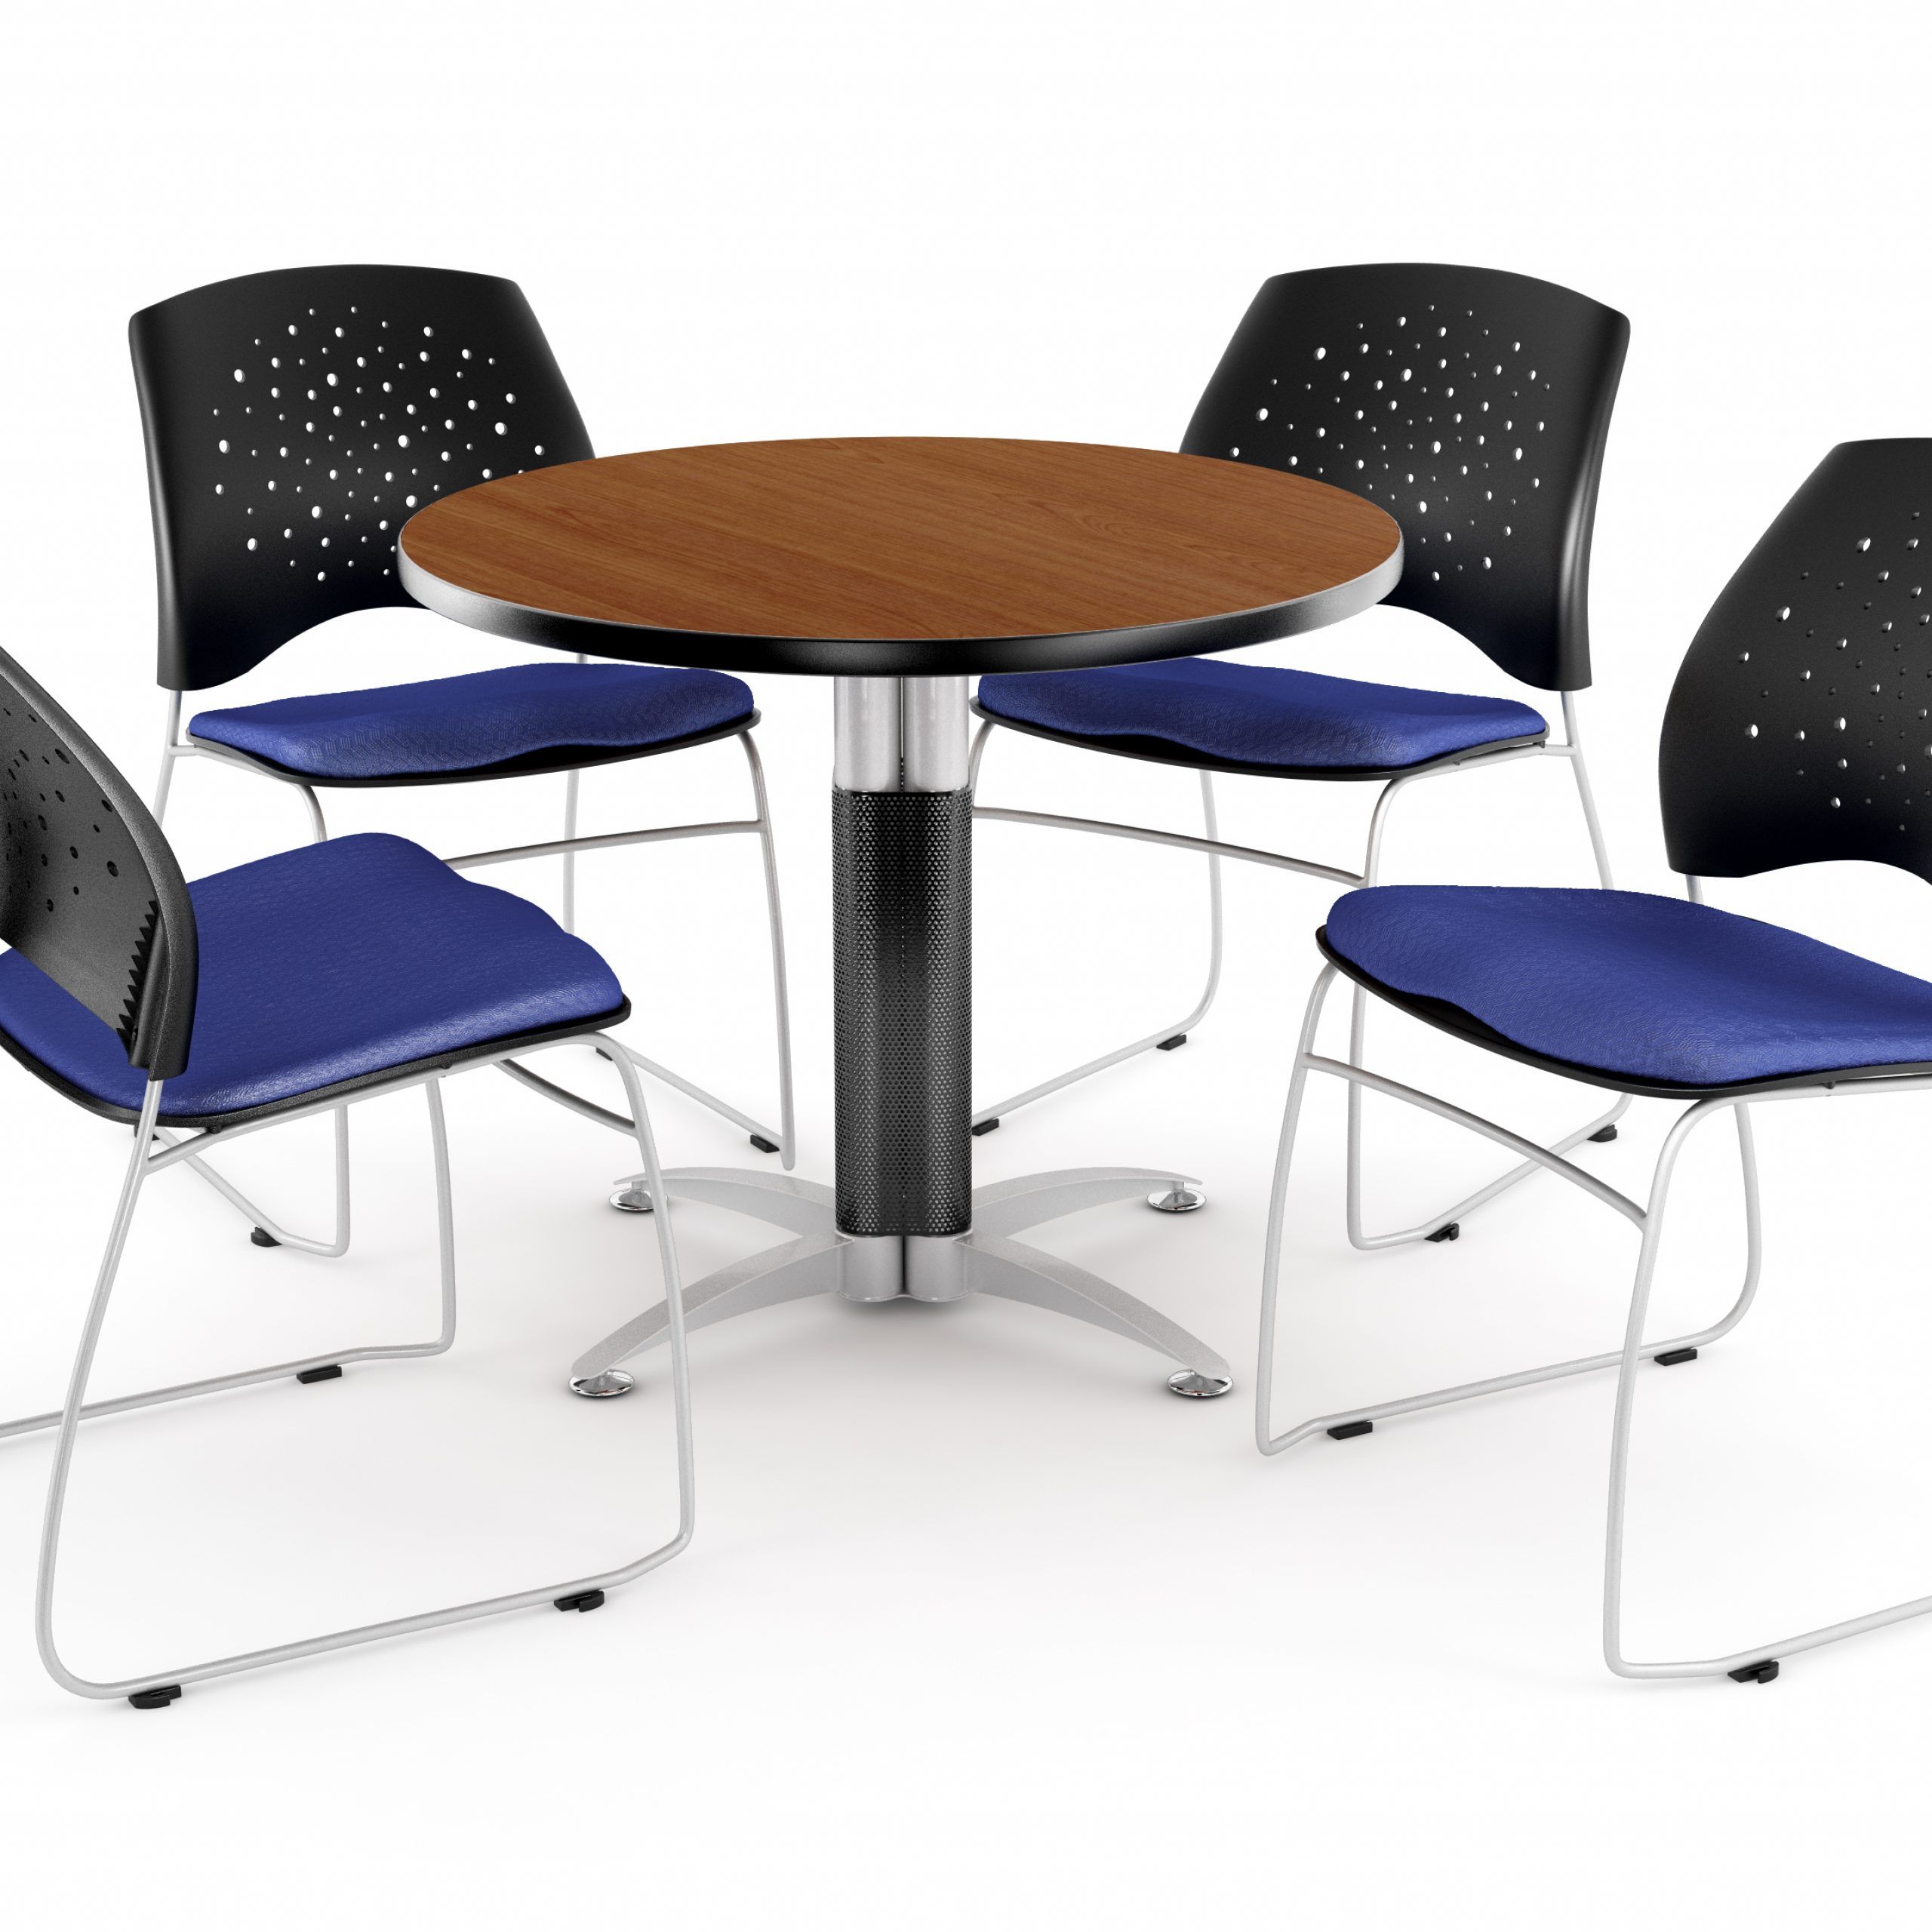 Mode Round Breakroom Tables Regarding Current Ofm Core Collection Breakroom Bundle, 42" Round Metal Mesh (View 7 of 20)